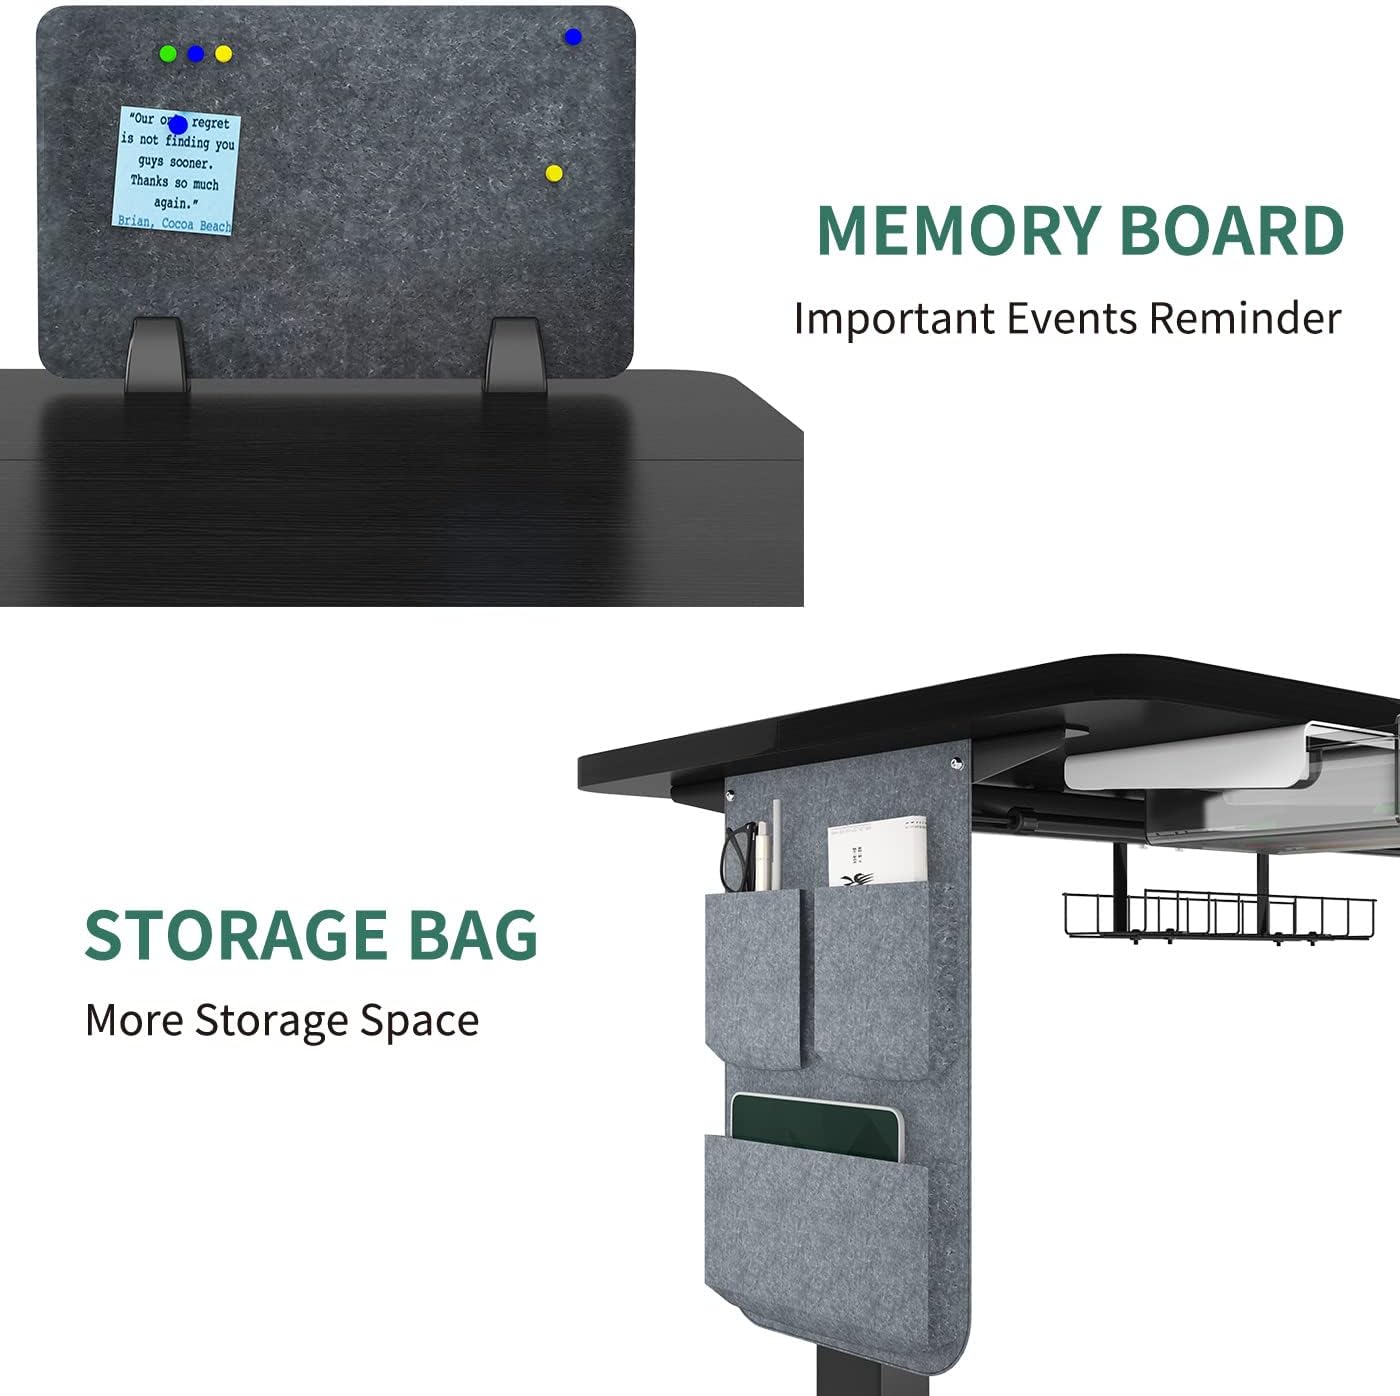 Maidesite desk comes with memory board and storage bag